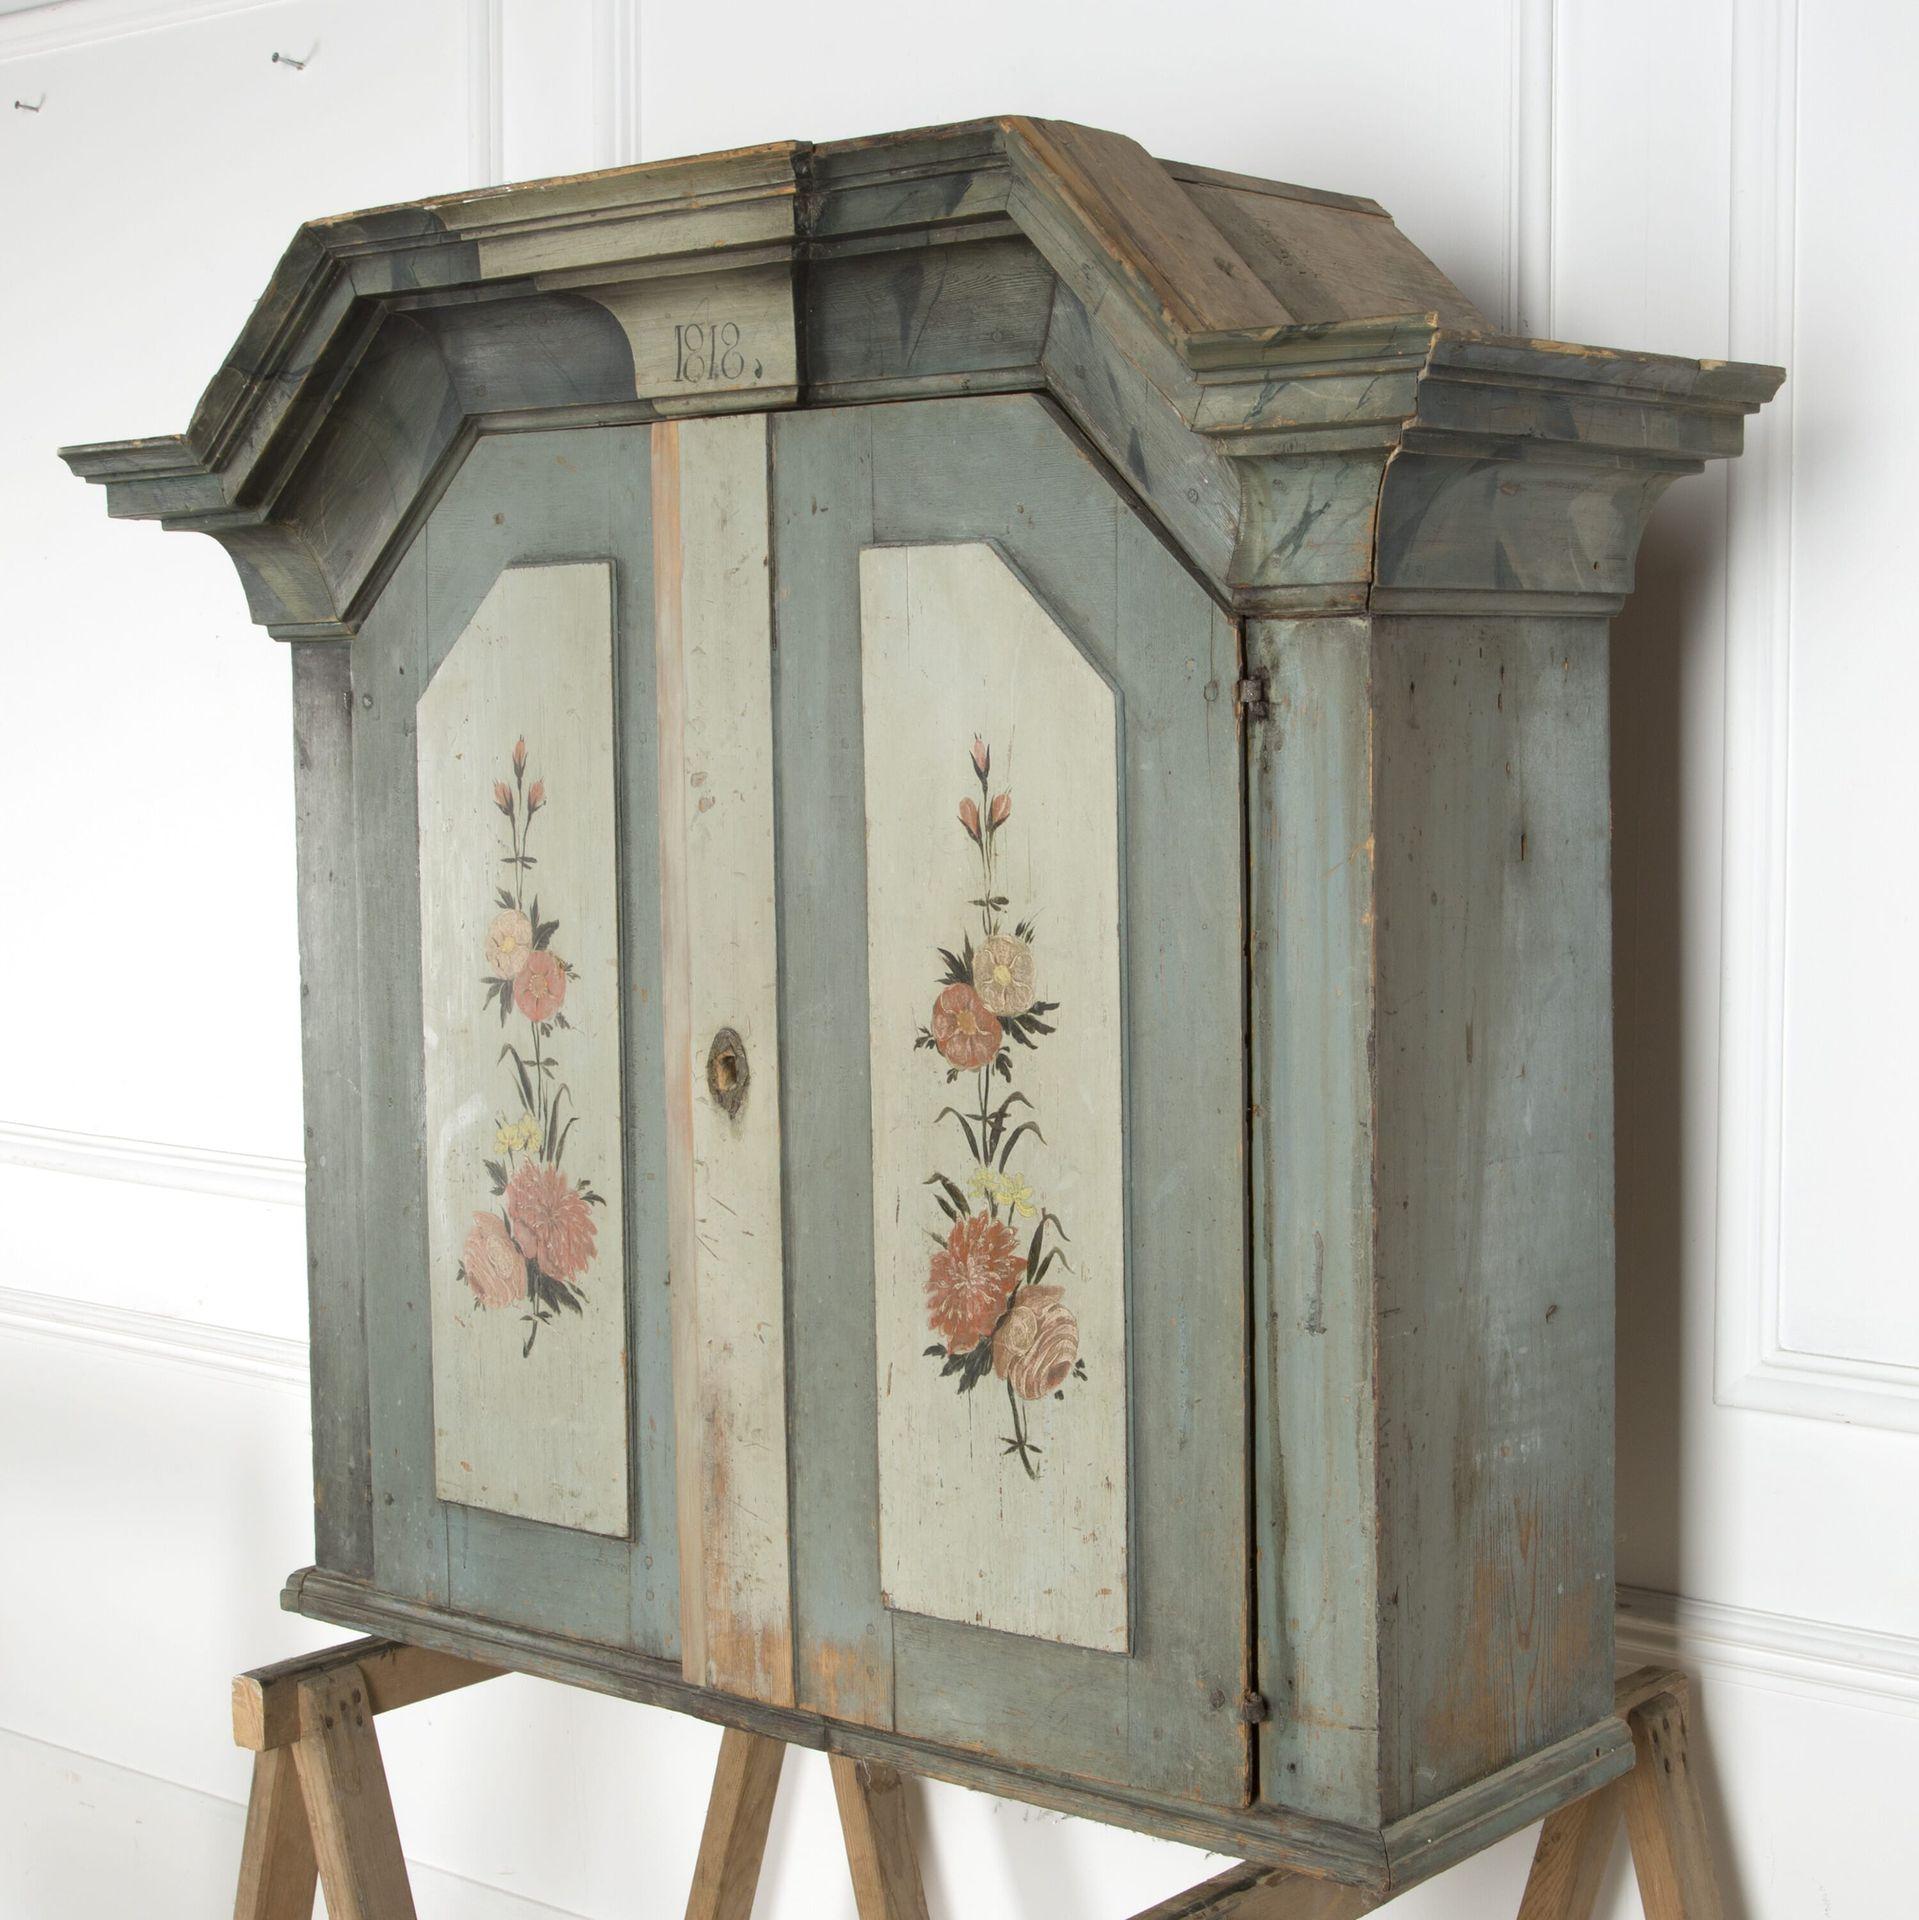 19th century Swedish painted wall cupboard with two doors and shelves.

Dated 1818.